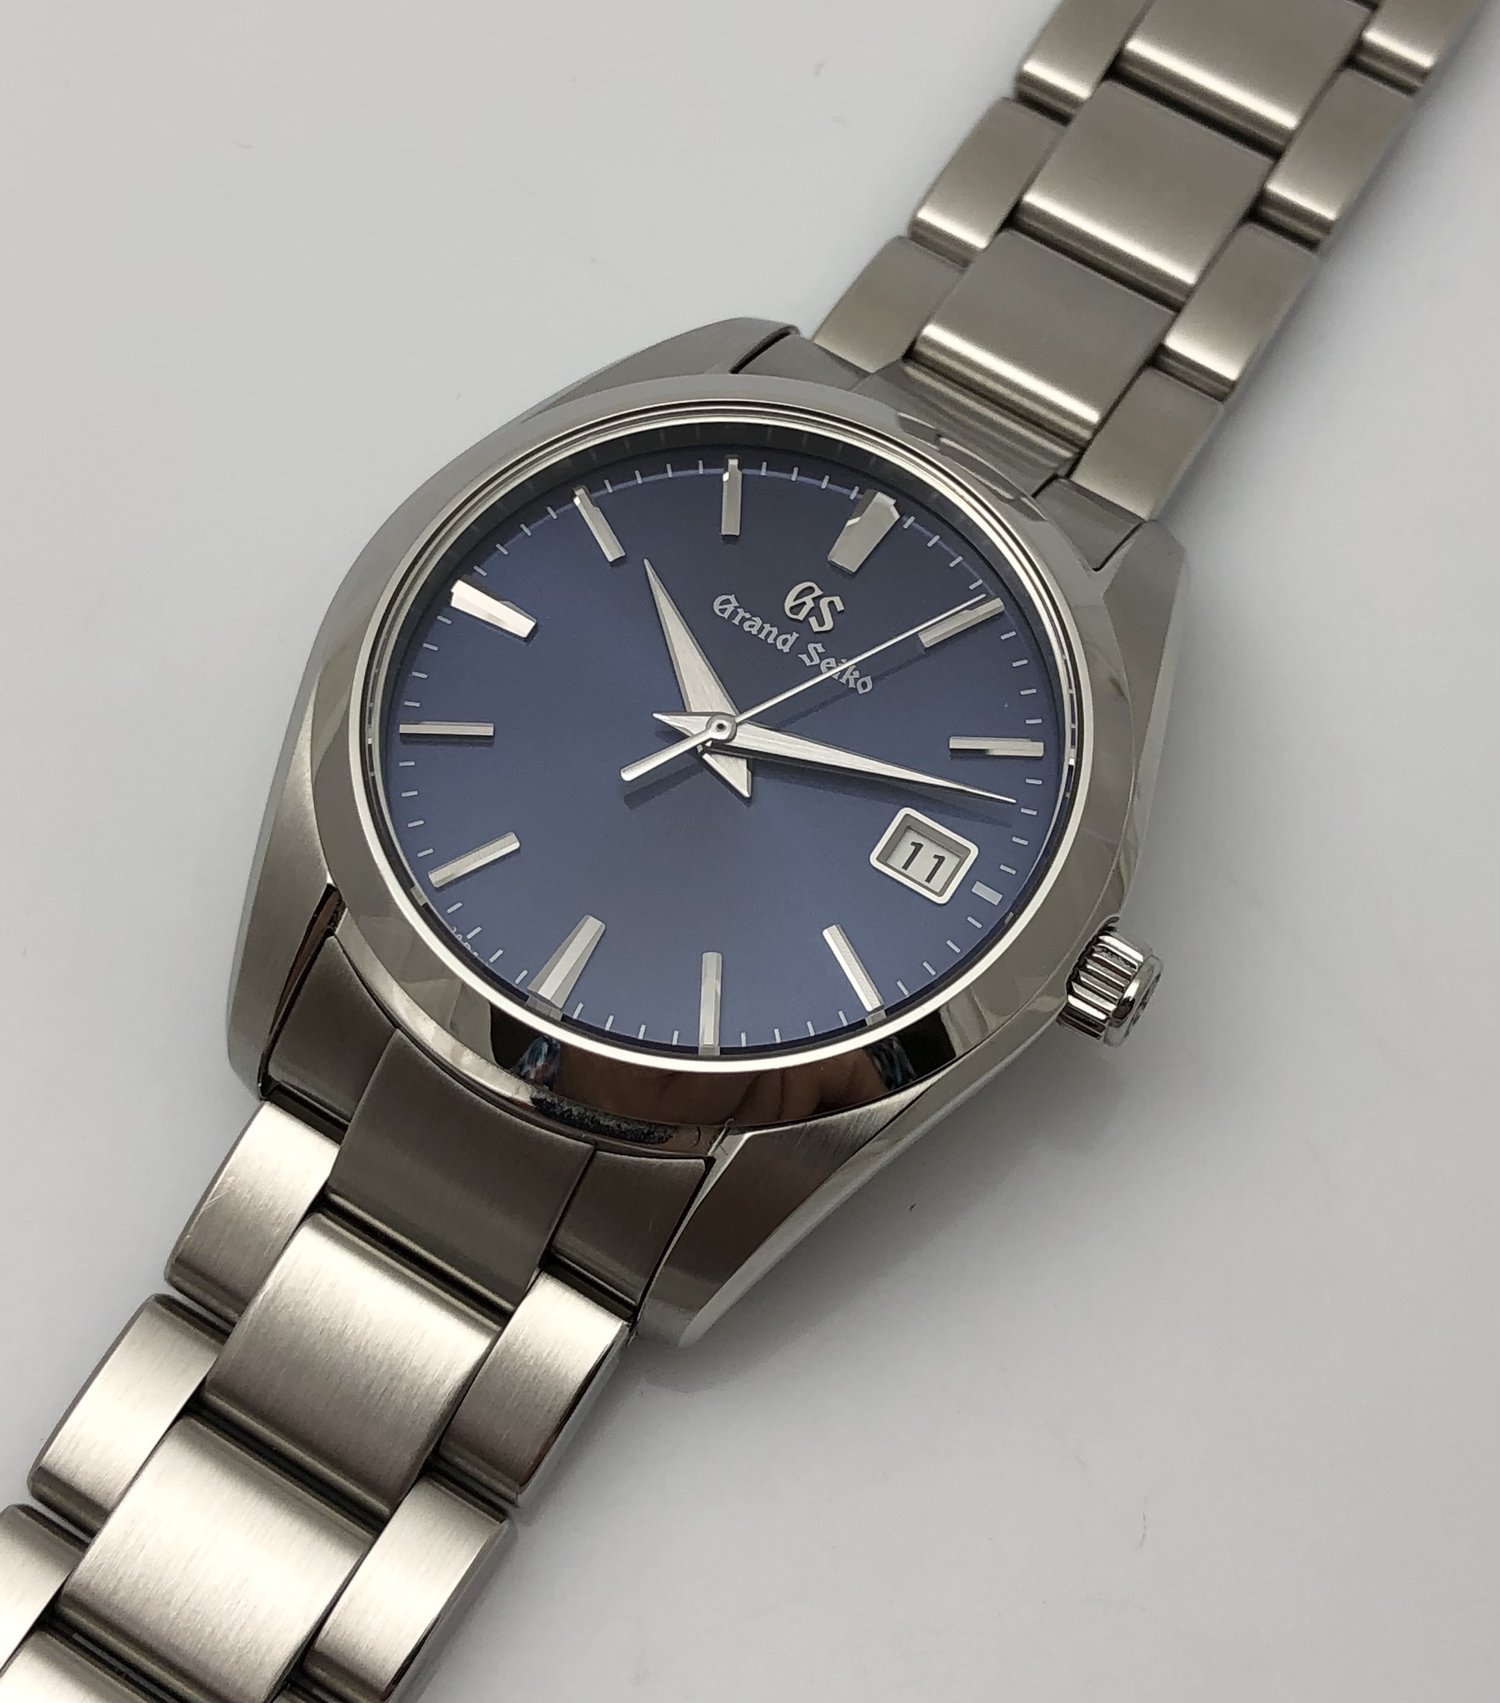 Grand Seiko 2021 Gentleman's Classic Quartz Blue Dial Calendar Steel  Wristwatch Ref SBGX265 with Box and Papers MINT Condition. — About Time